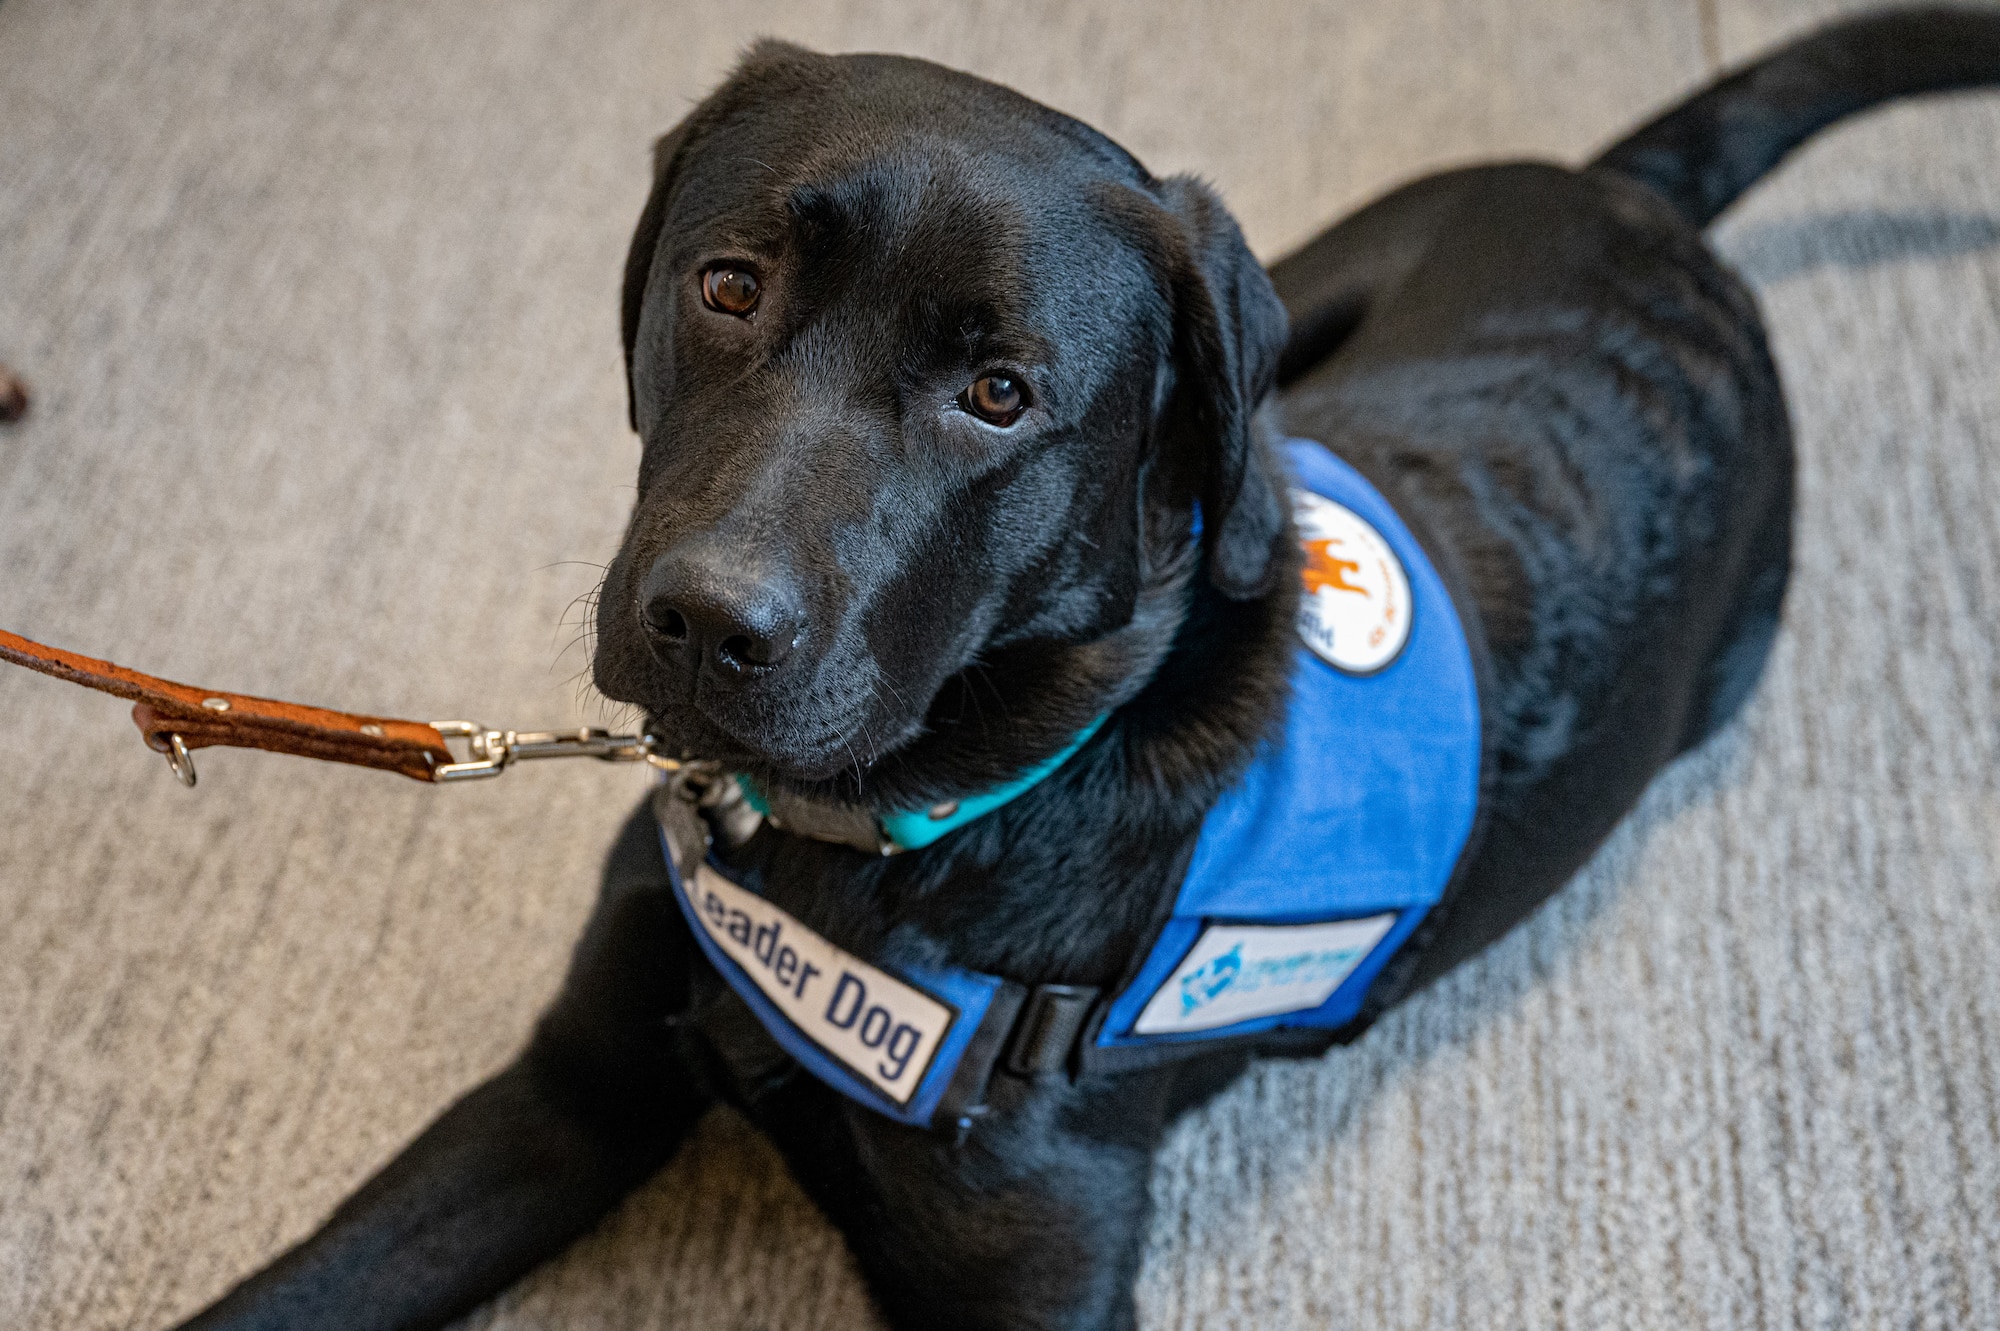 Comet, a guide-dog-in-training, lays in the office at Patrick Space Force Base, Fla., June 8, 2023. Comet’s trainer works in risk analysis for Space Launch Delta 45. (U.S. Space Force photo by Senior Airman Dakota Raub)